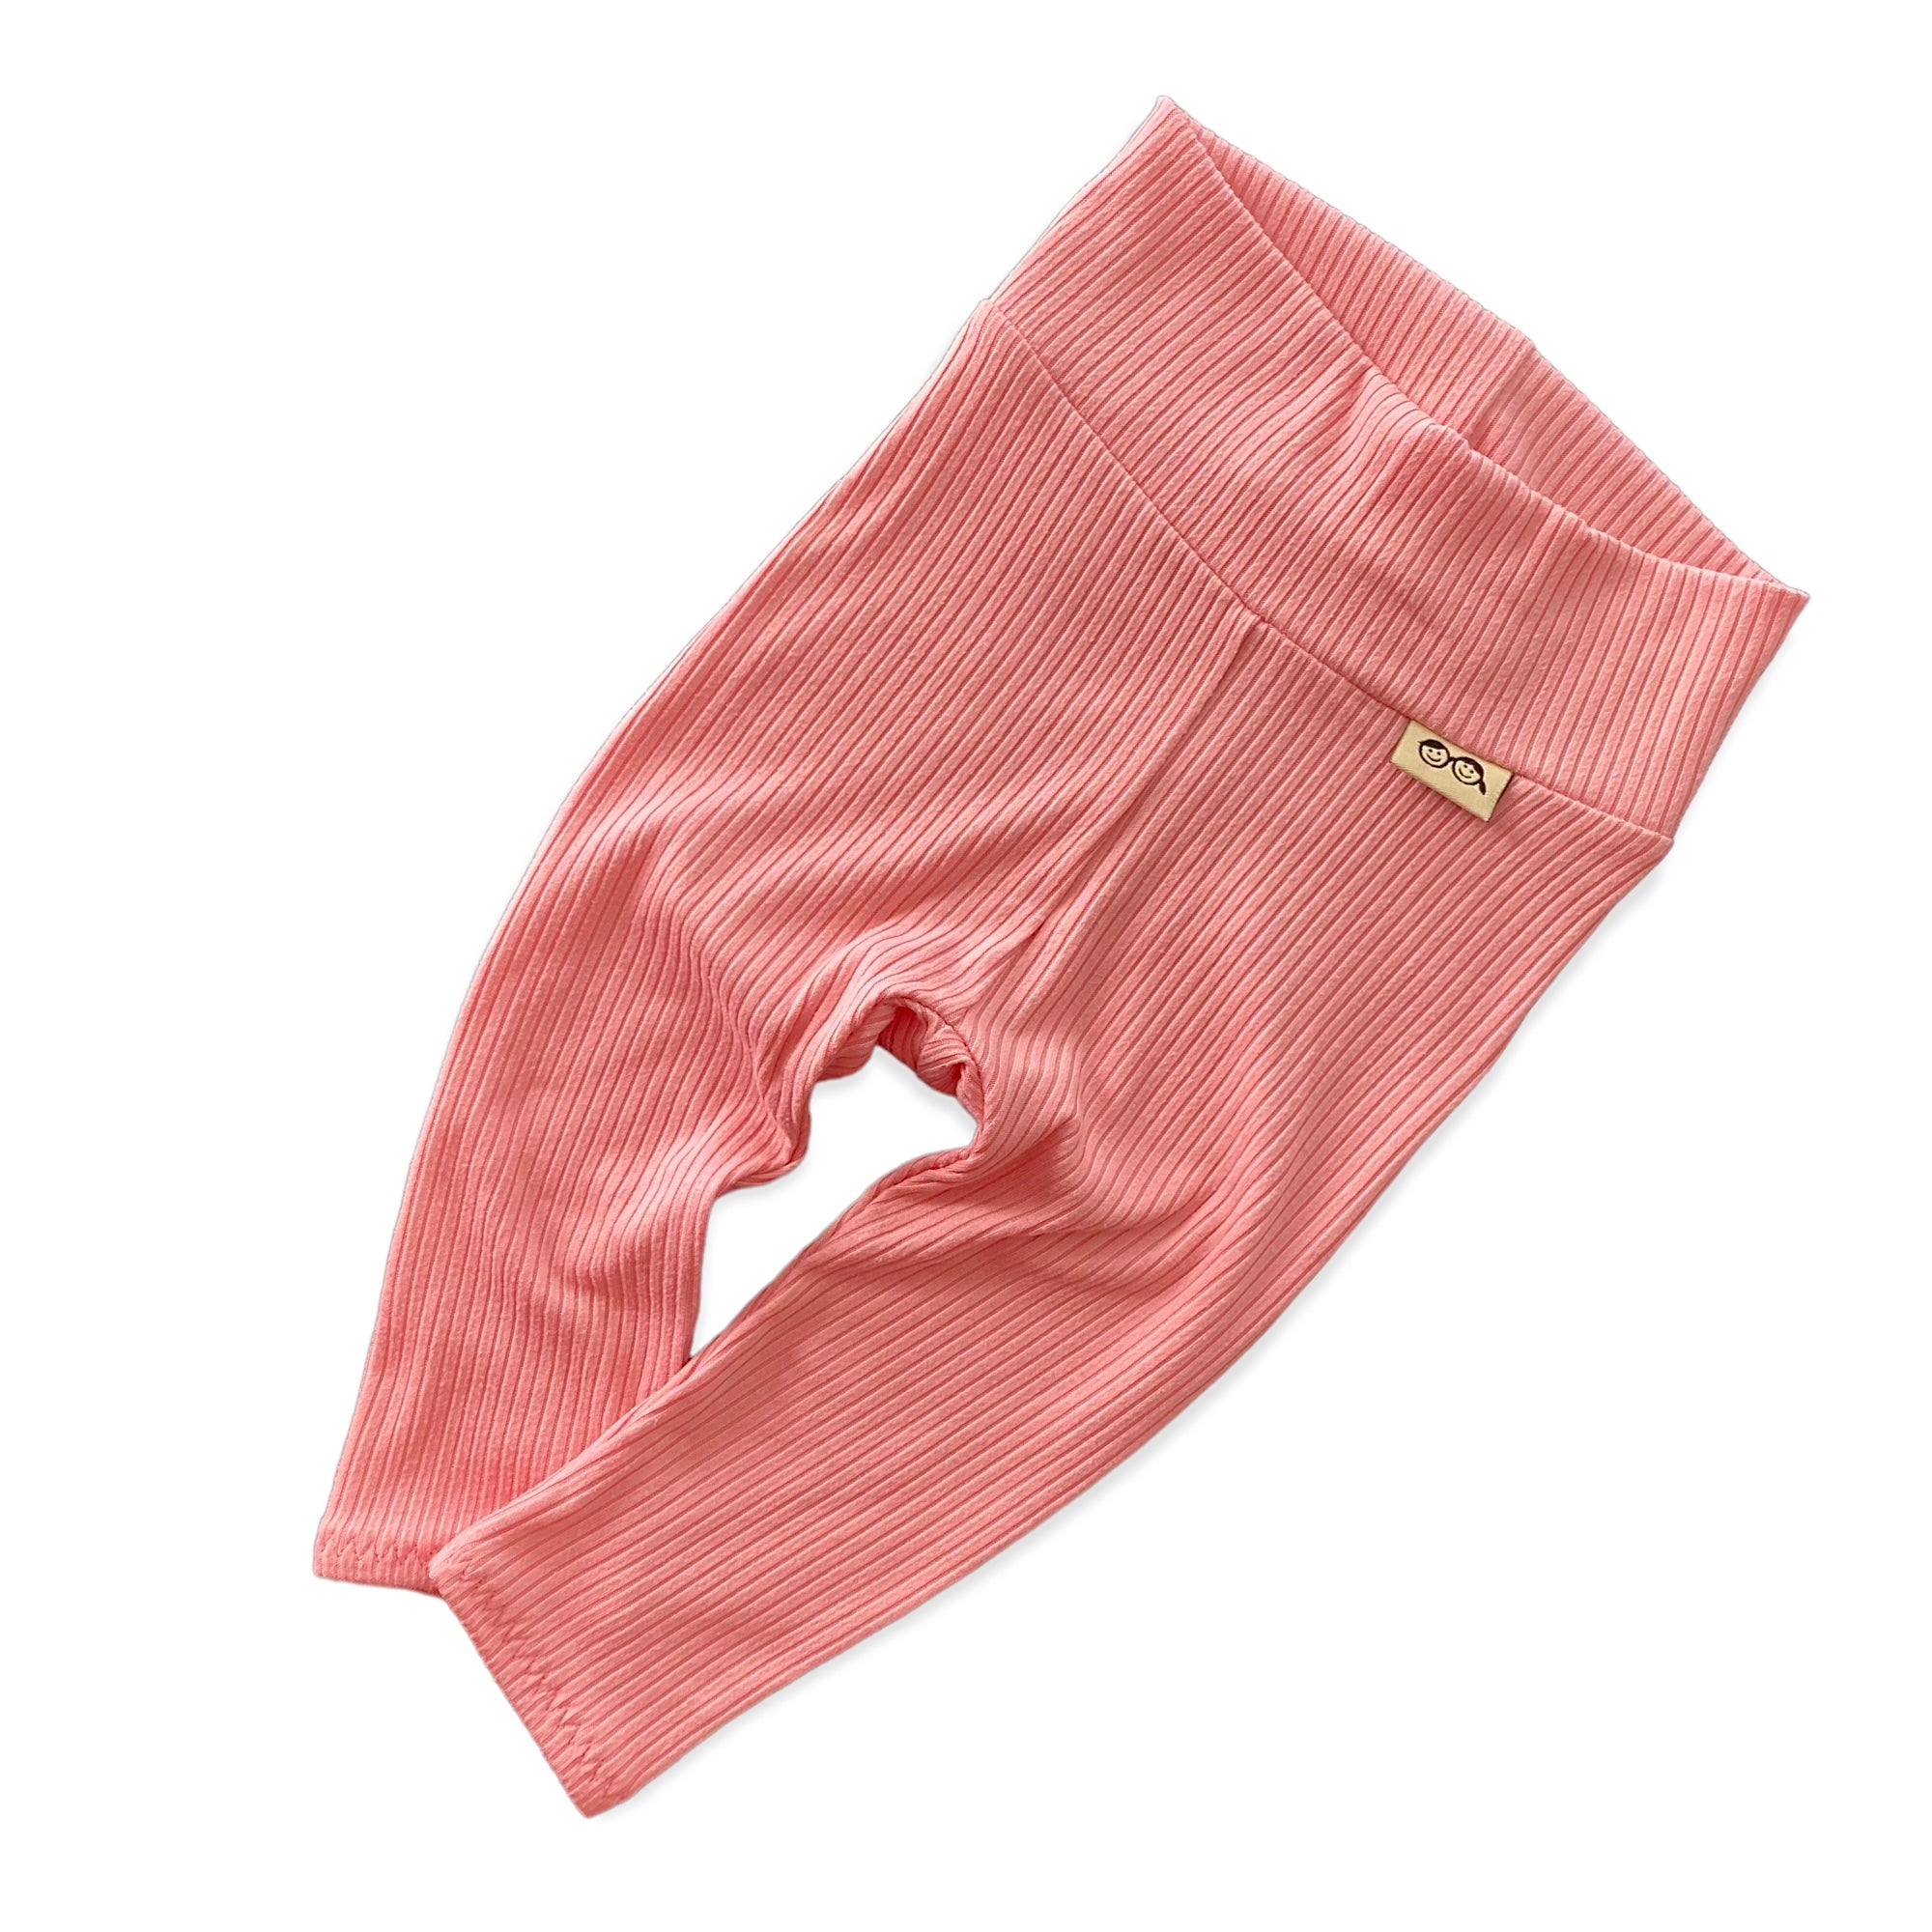 Pink Ribbed Leggings and/or Headbands